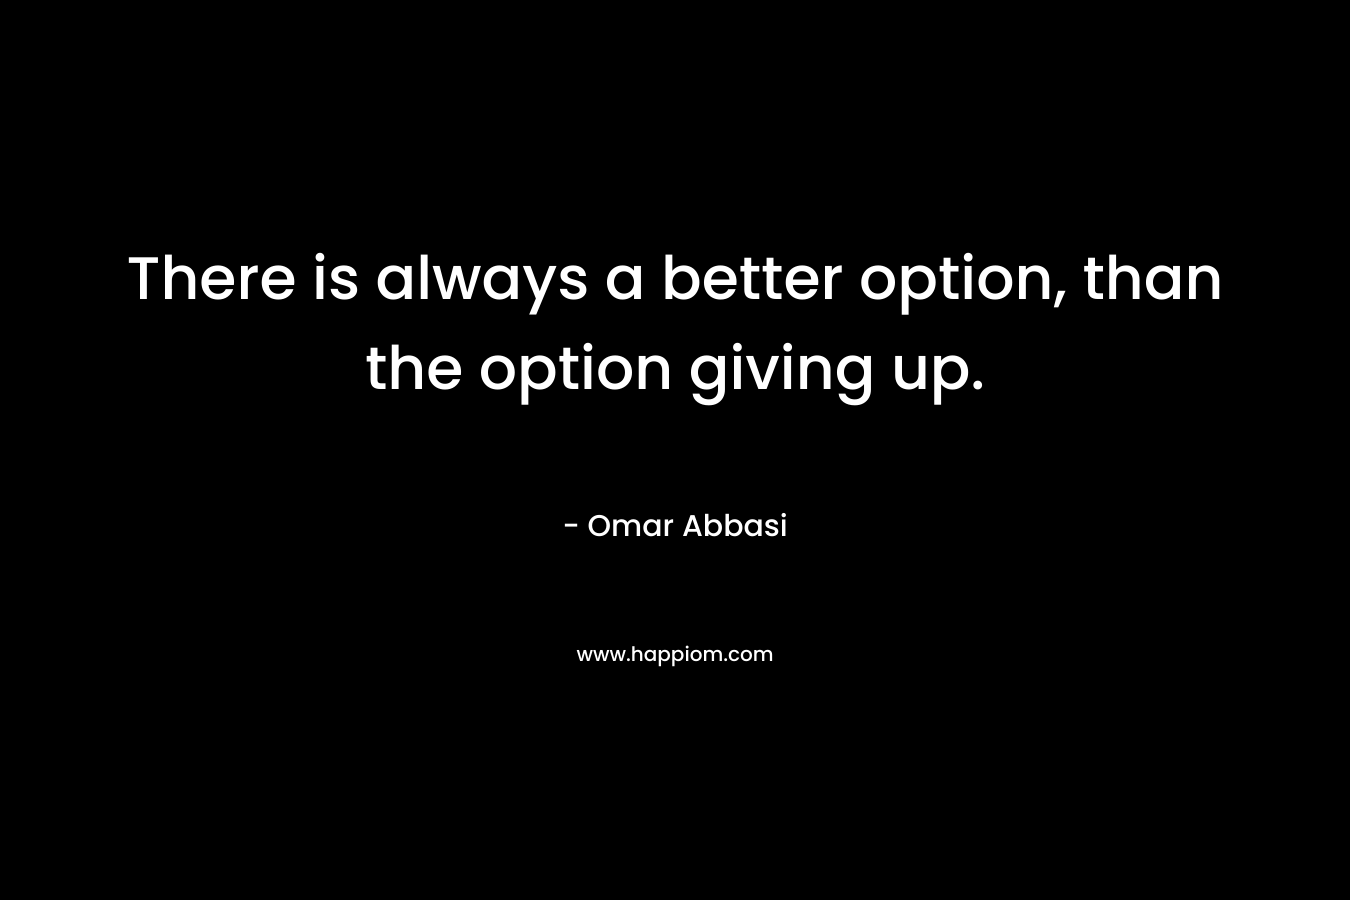 There is always a better option, than the option giving up.